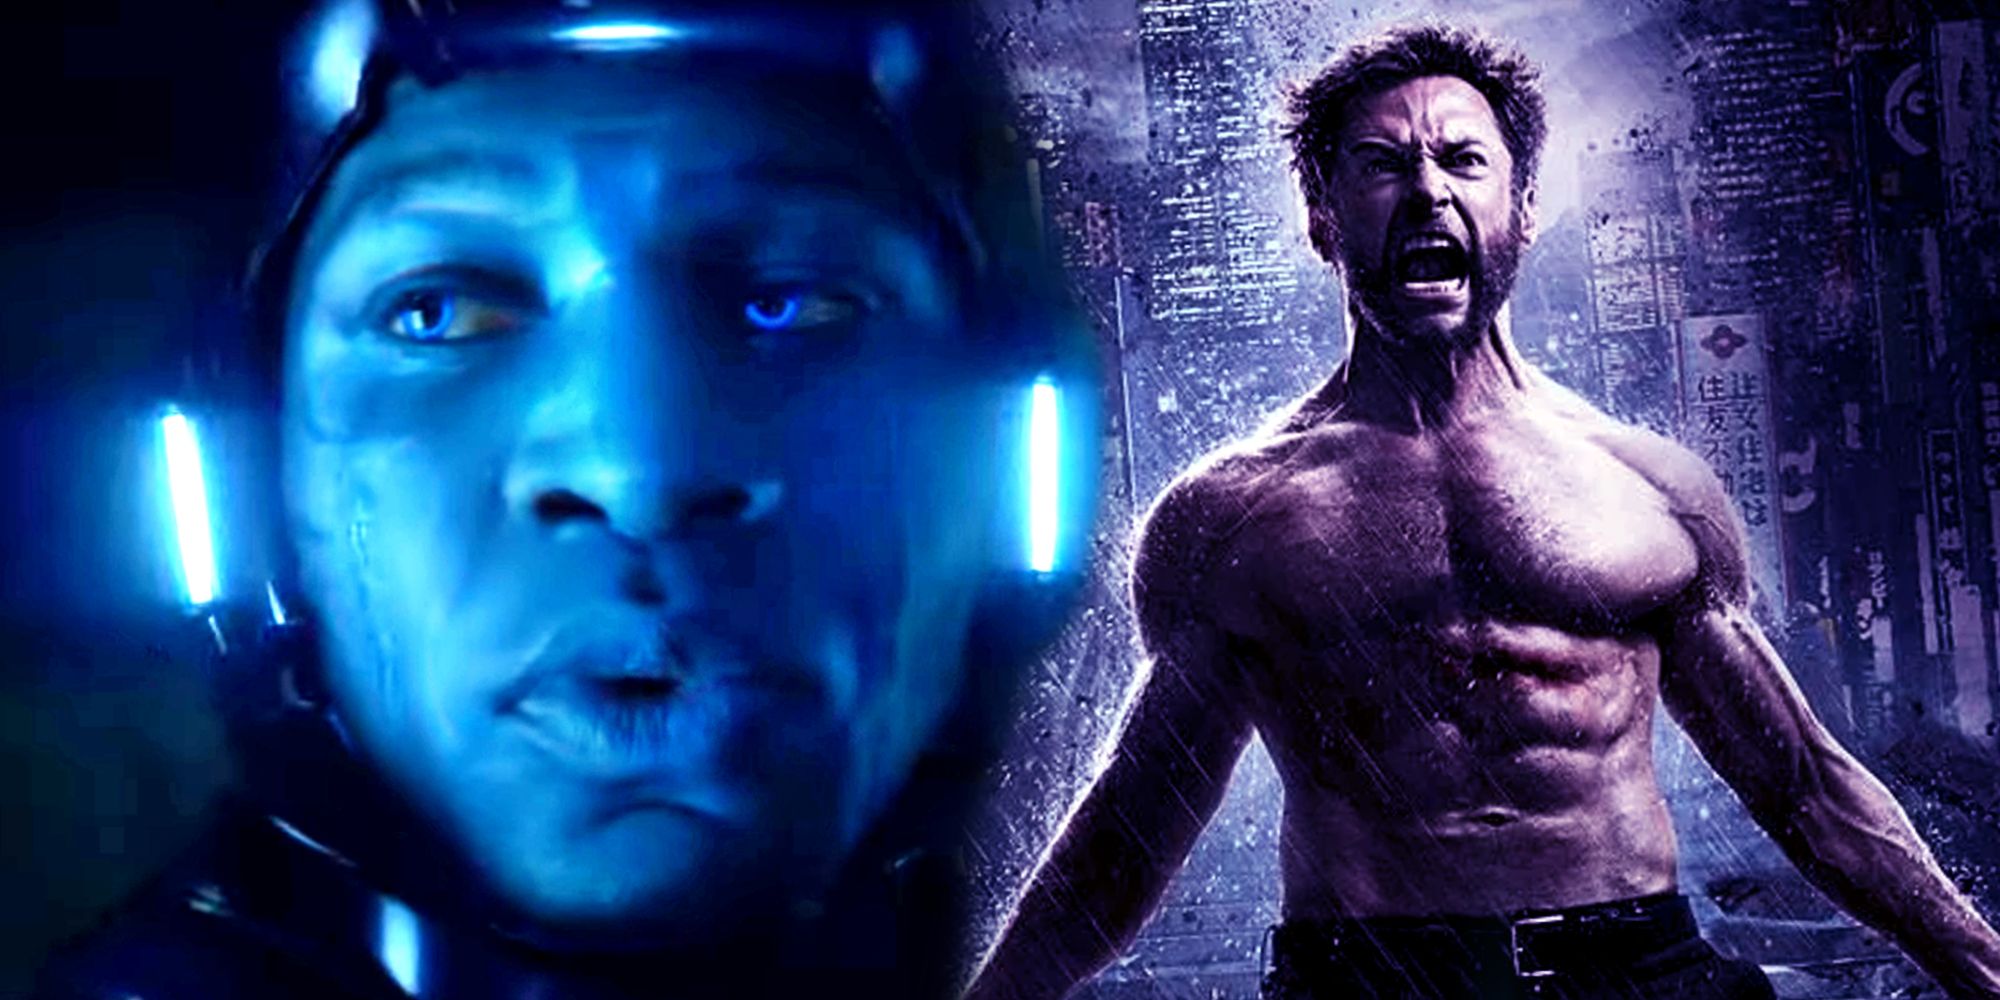 Hugh Jackman's Wolverine and Jonathan Majors' Kang the Conqueror in the MCU